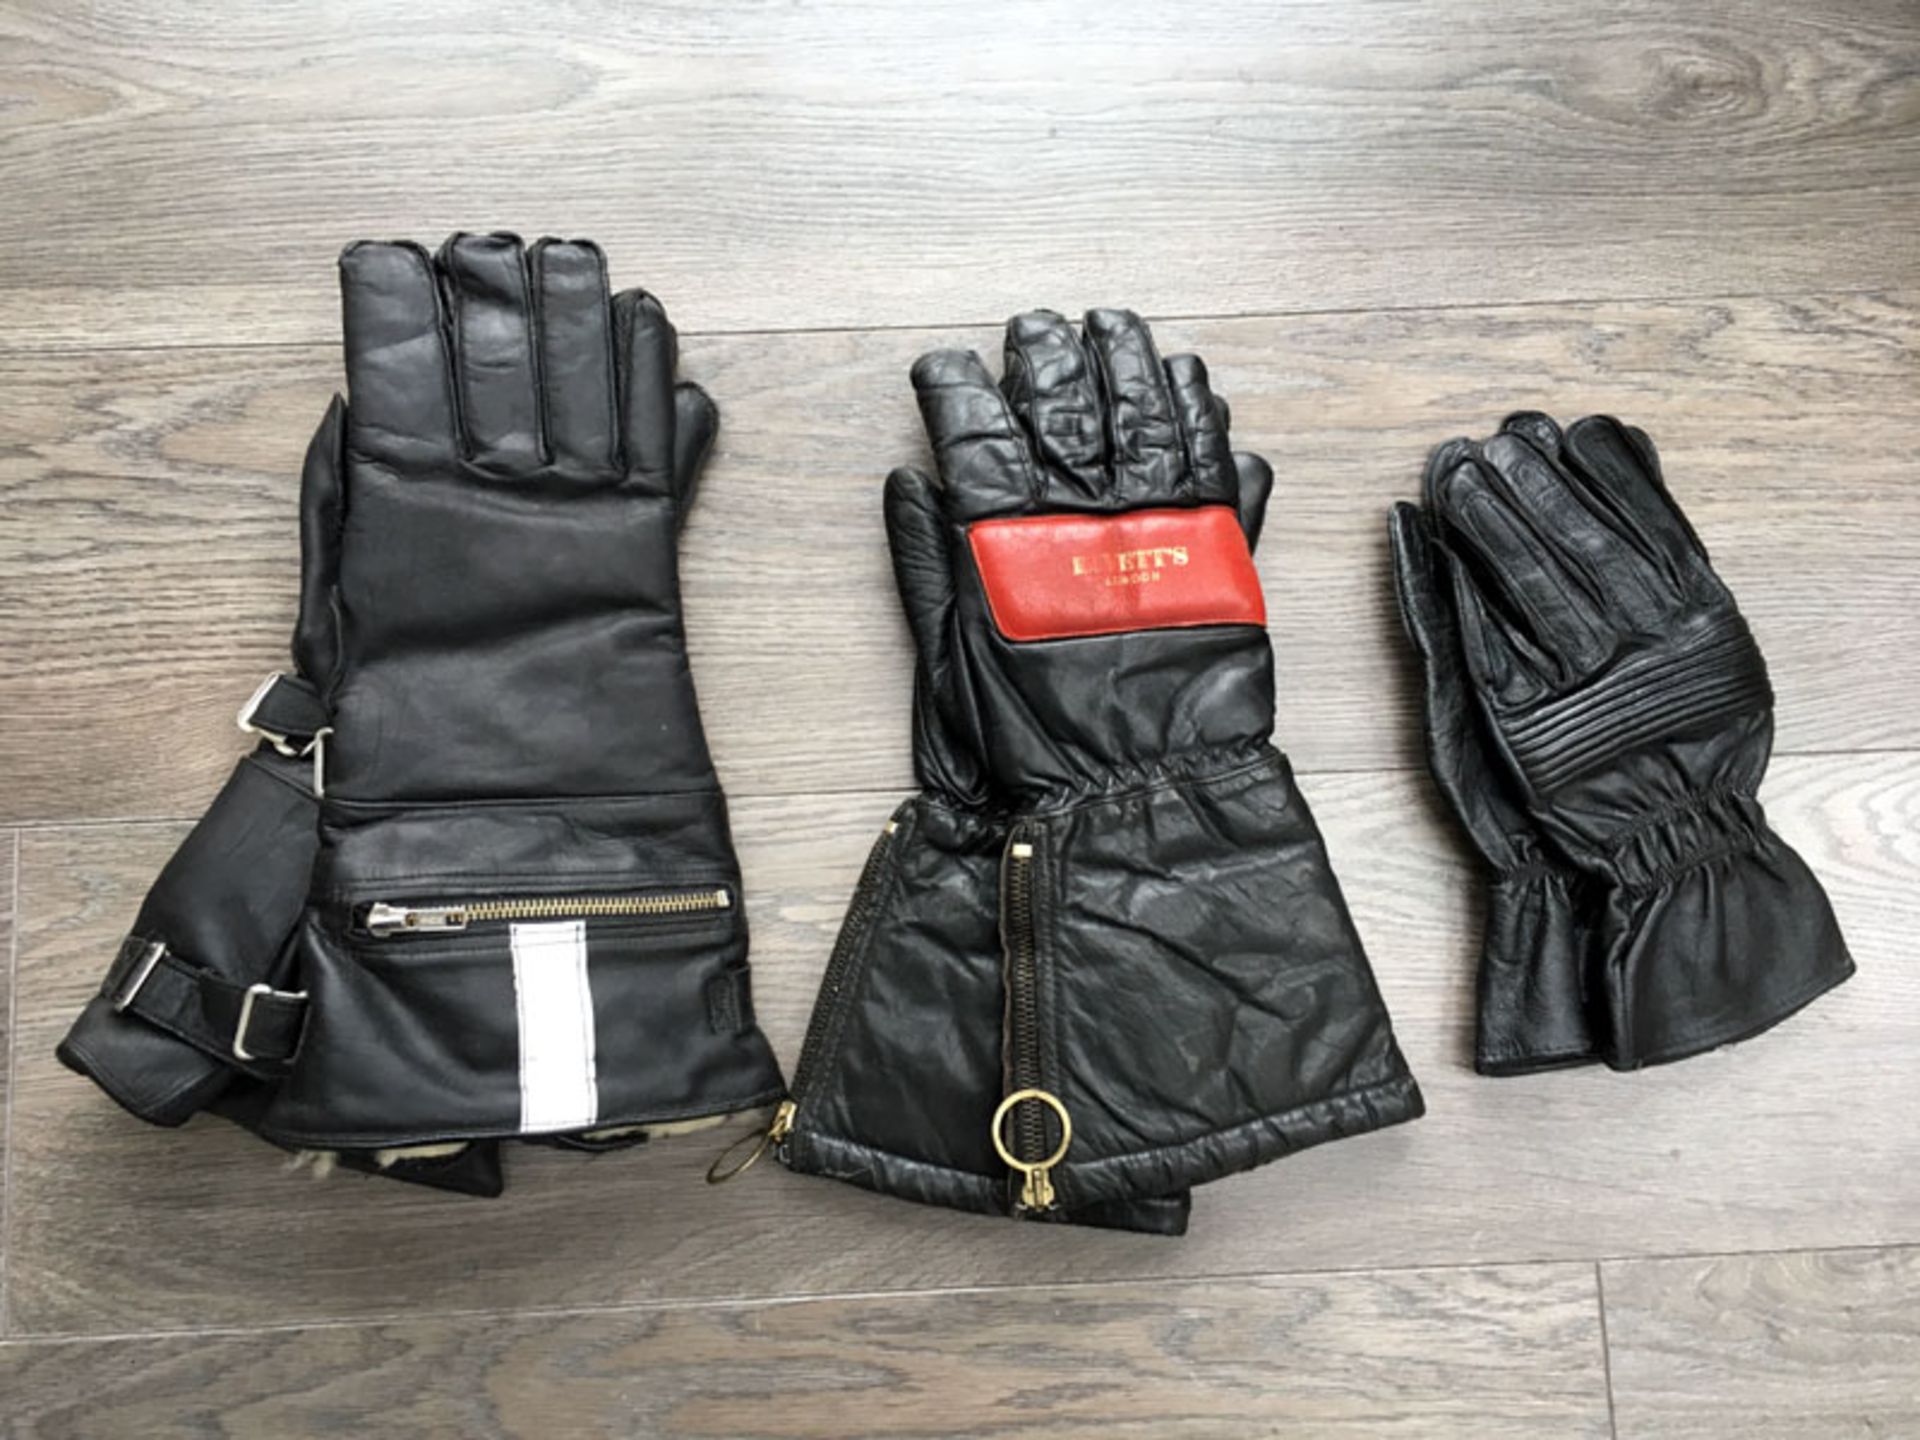 Three Pairs of Motorcycling Gloves